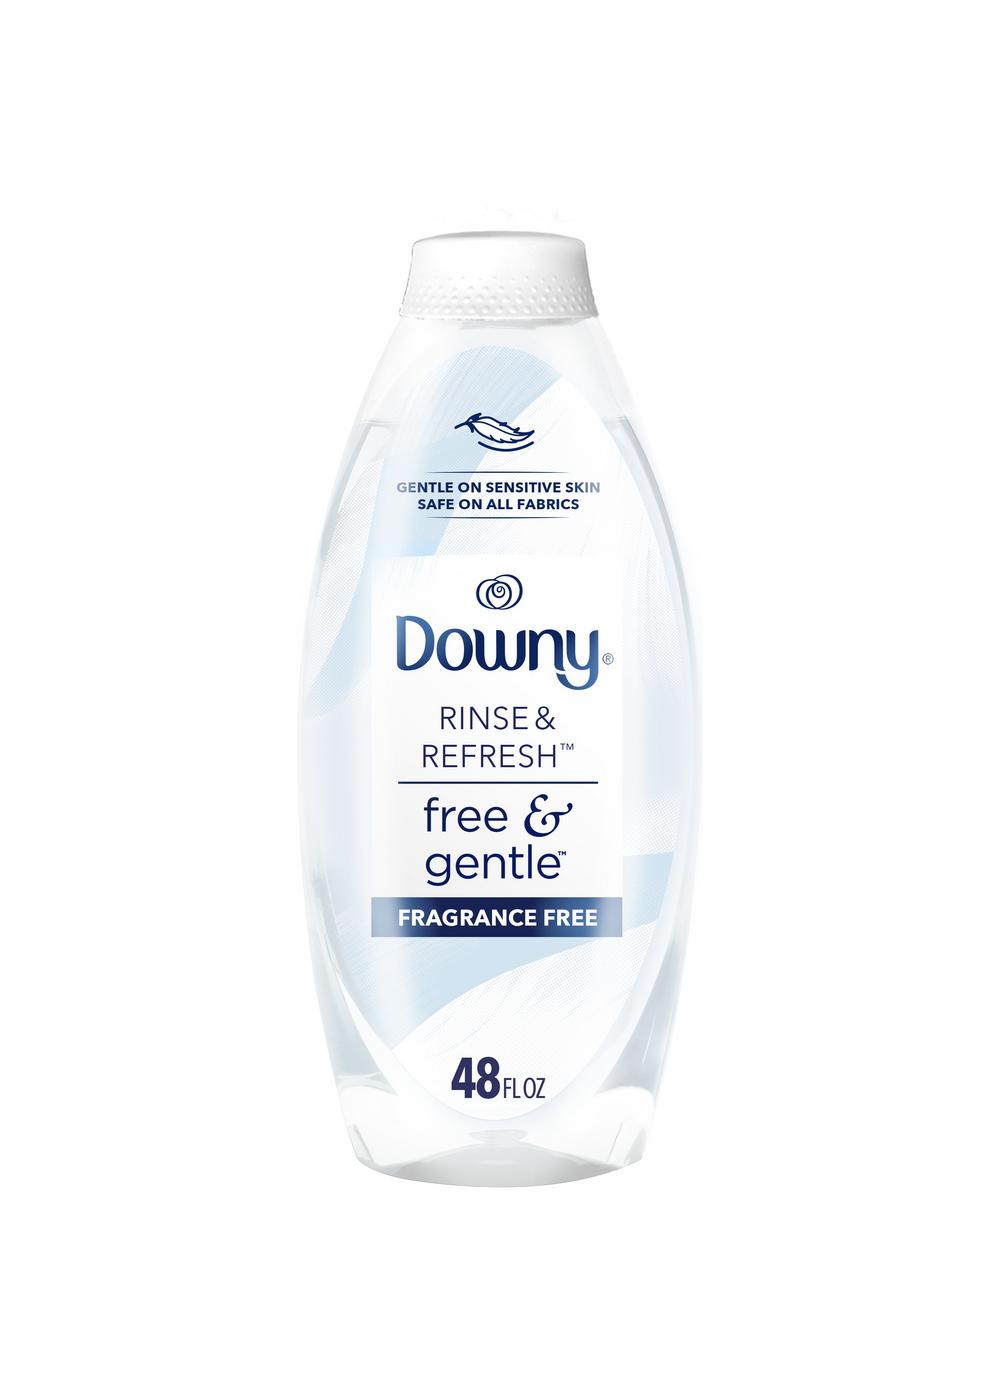 Downy Rinse & Refresh Laundry Odor Remover, 70 Loads - Free & Gentle; image 1 of 9